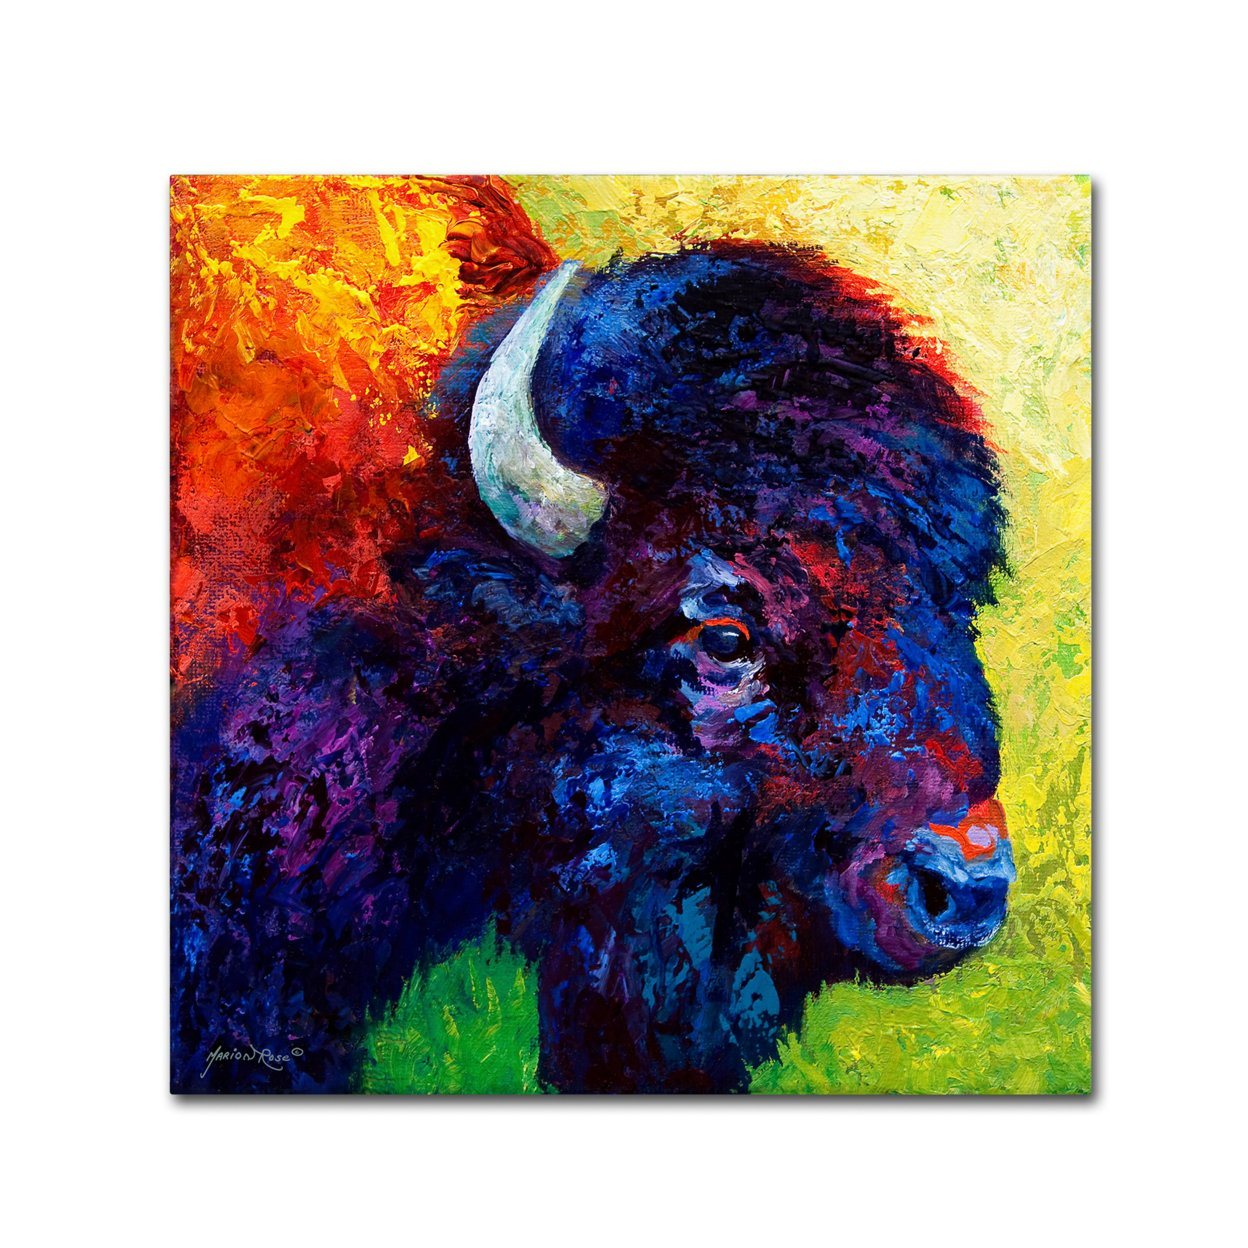 Marion Rose 'Bison Head III' Ready To Hang Canvas Art 14 X 14 Inches Made In USA